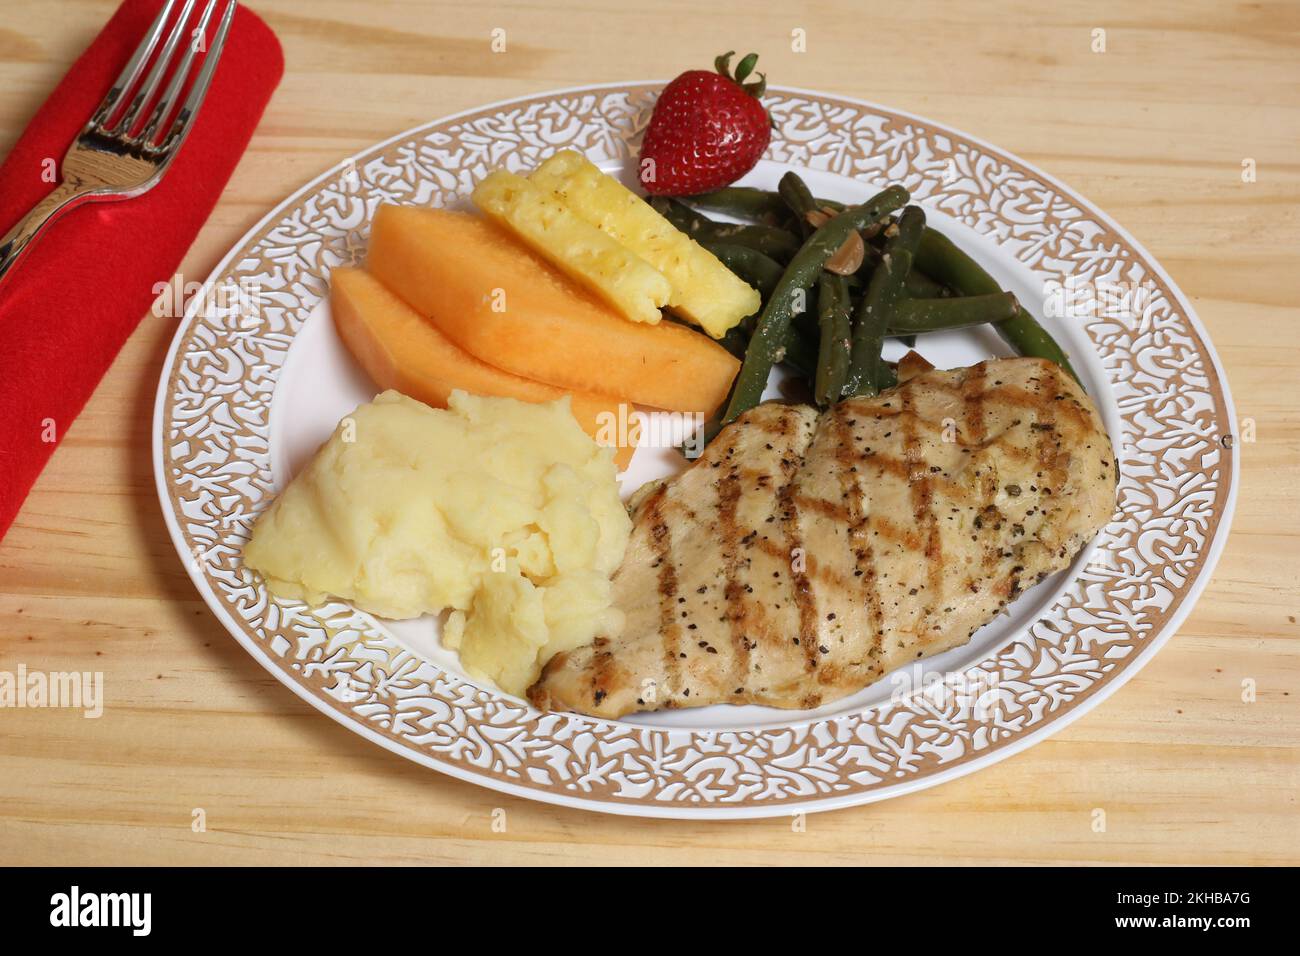 Grilled Chicken and Vegetable Dinner With Fruit at Wedding Stock Photo